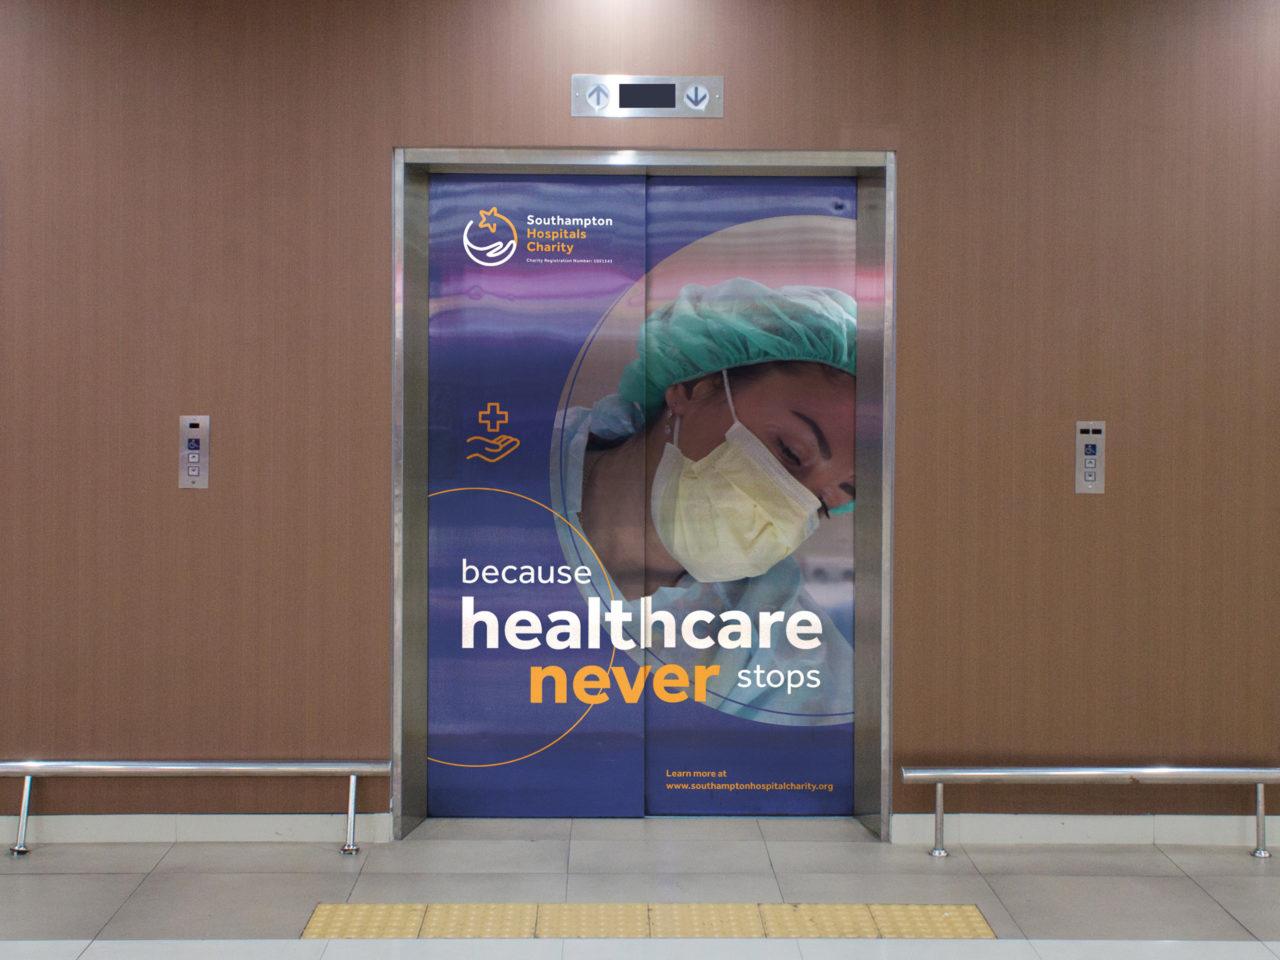 An image to show how the brand messaging and imagery could be applied to elevator doors.